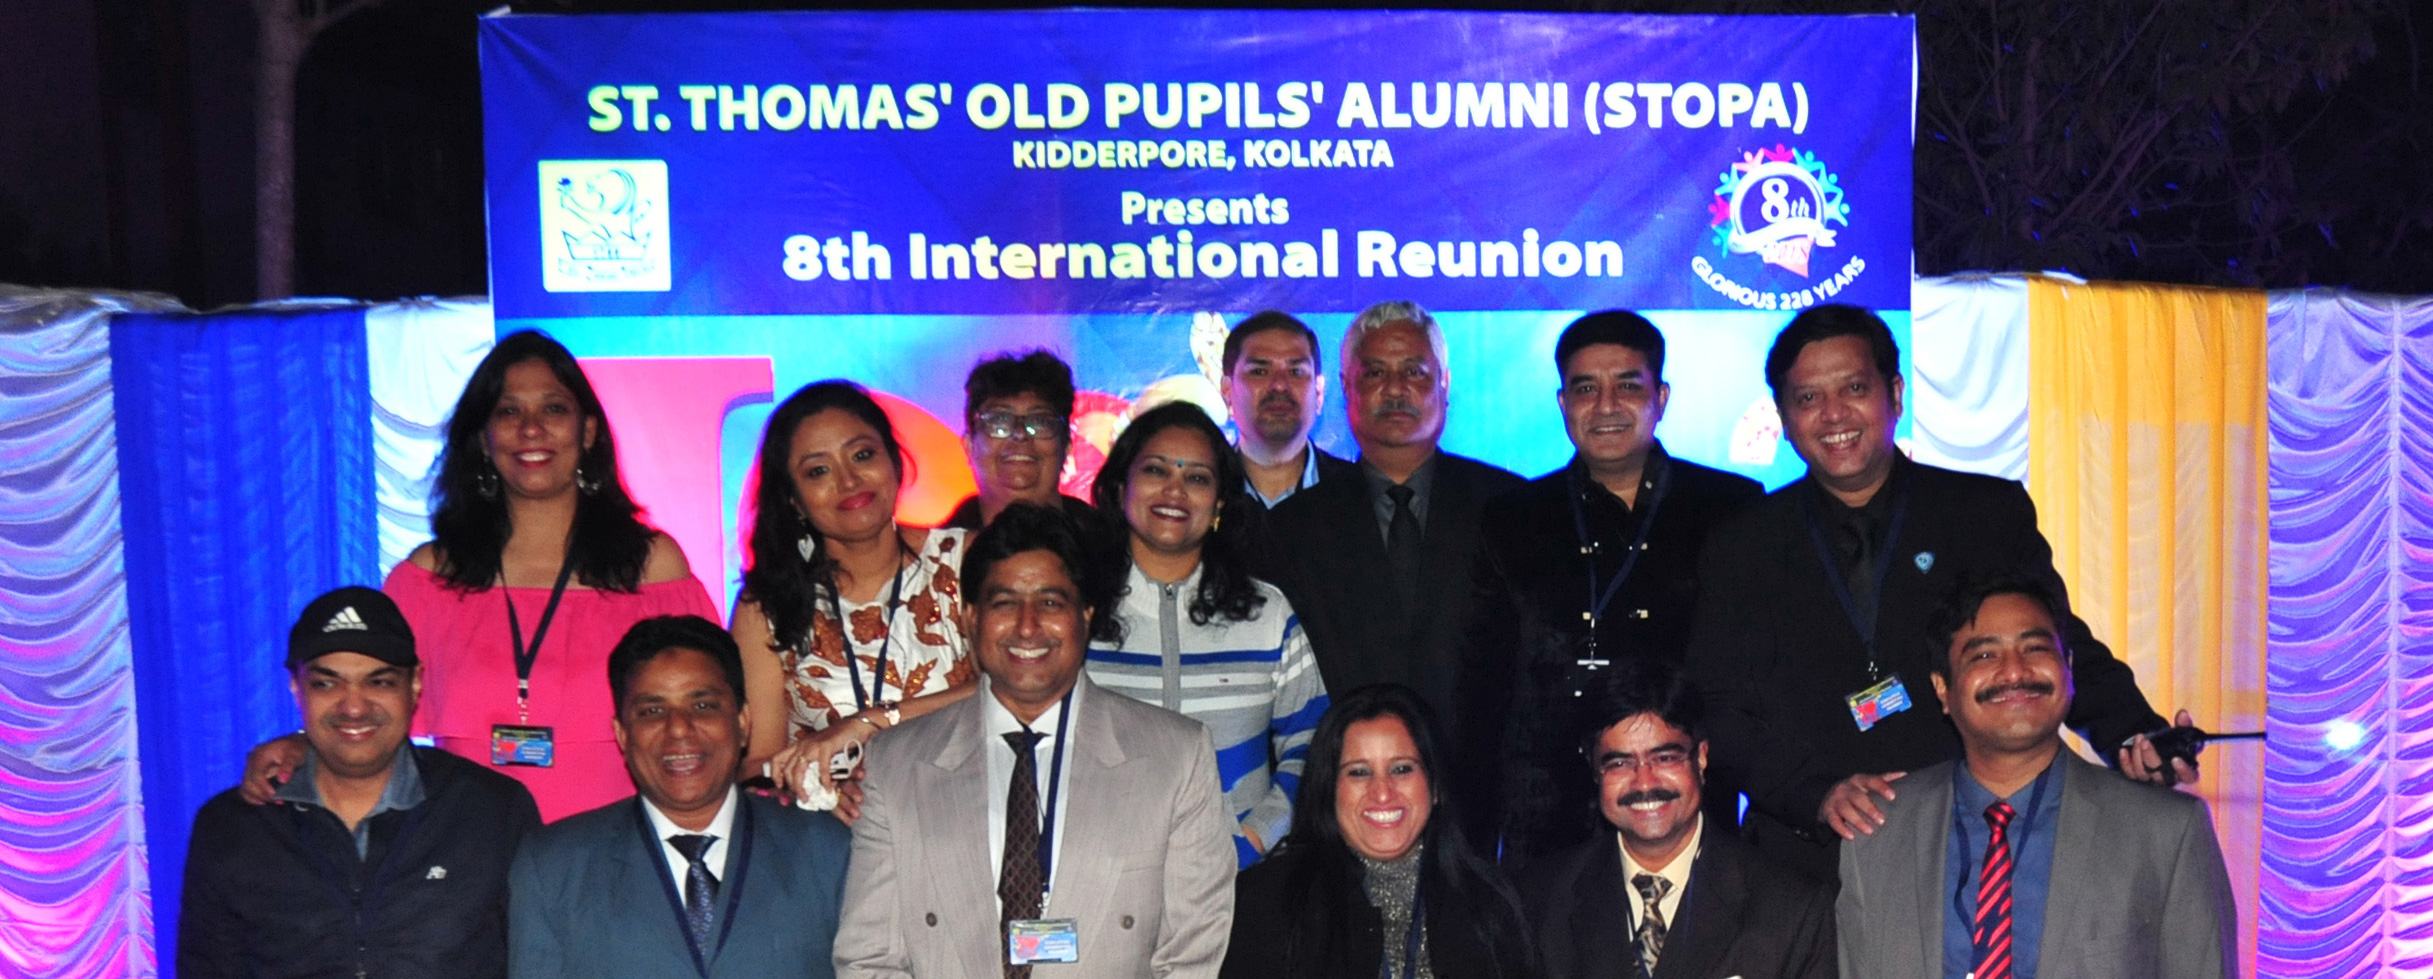 In recent years, the popularity of five-yearly class reunions has grown enormously